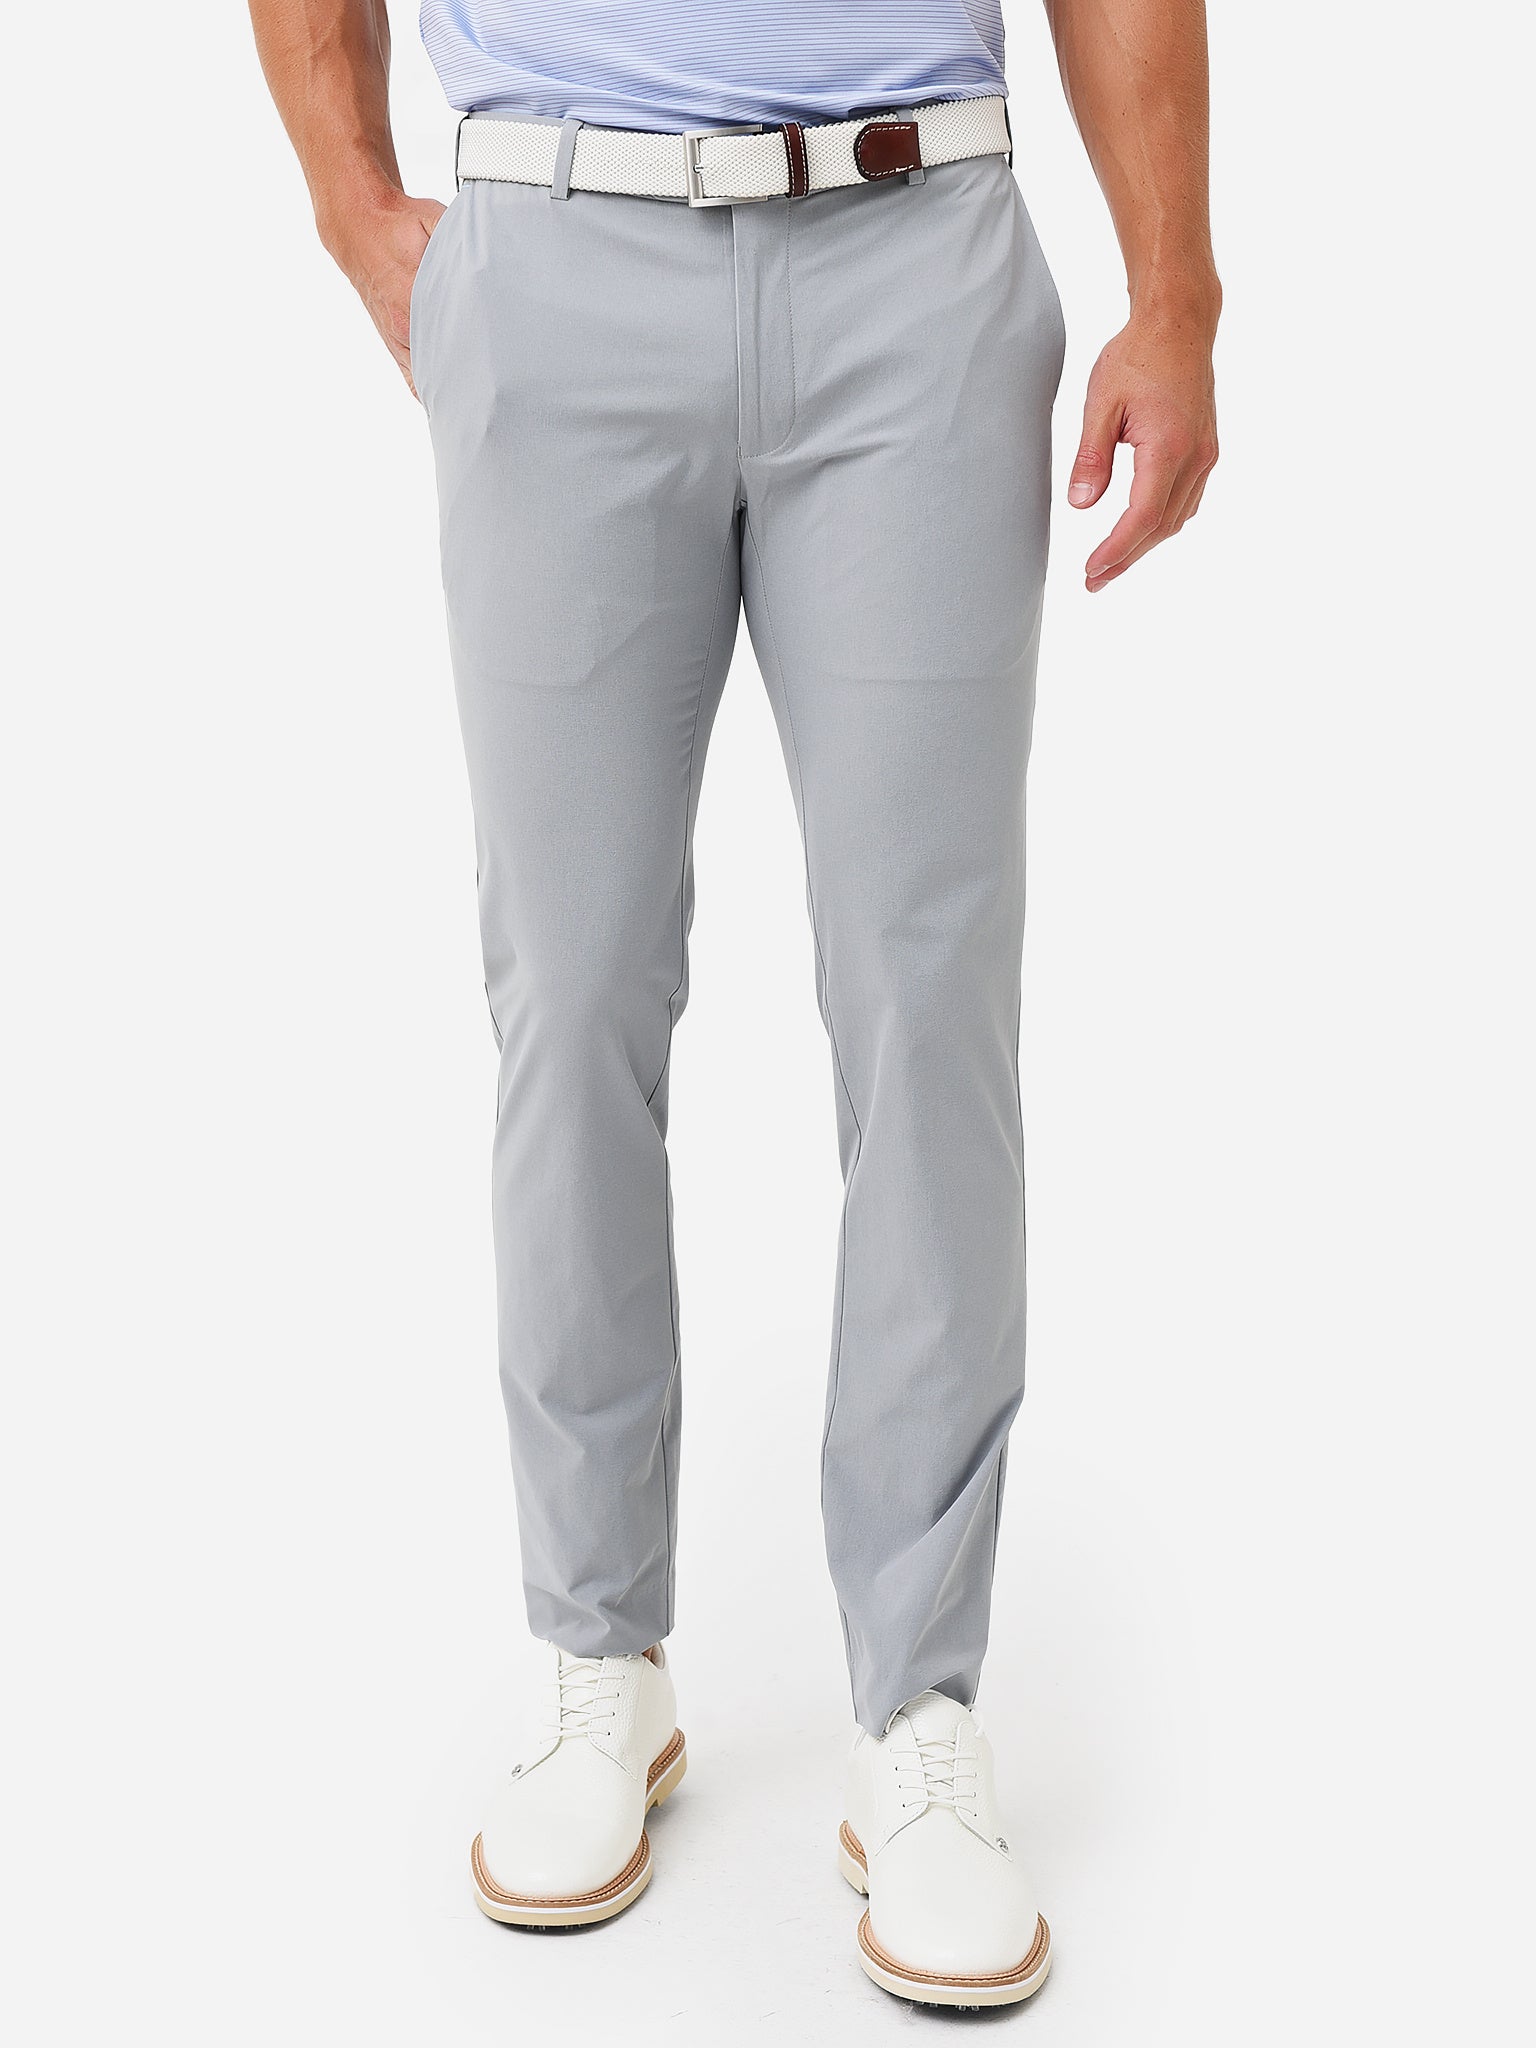 Peter Millar Crown Crafted Surge Performance Trouser: British Grey - Craig  Reagin Clothiers